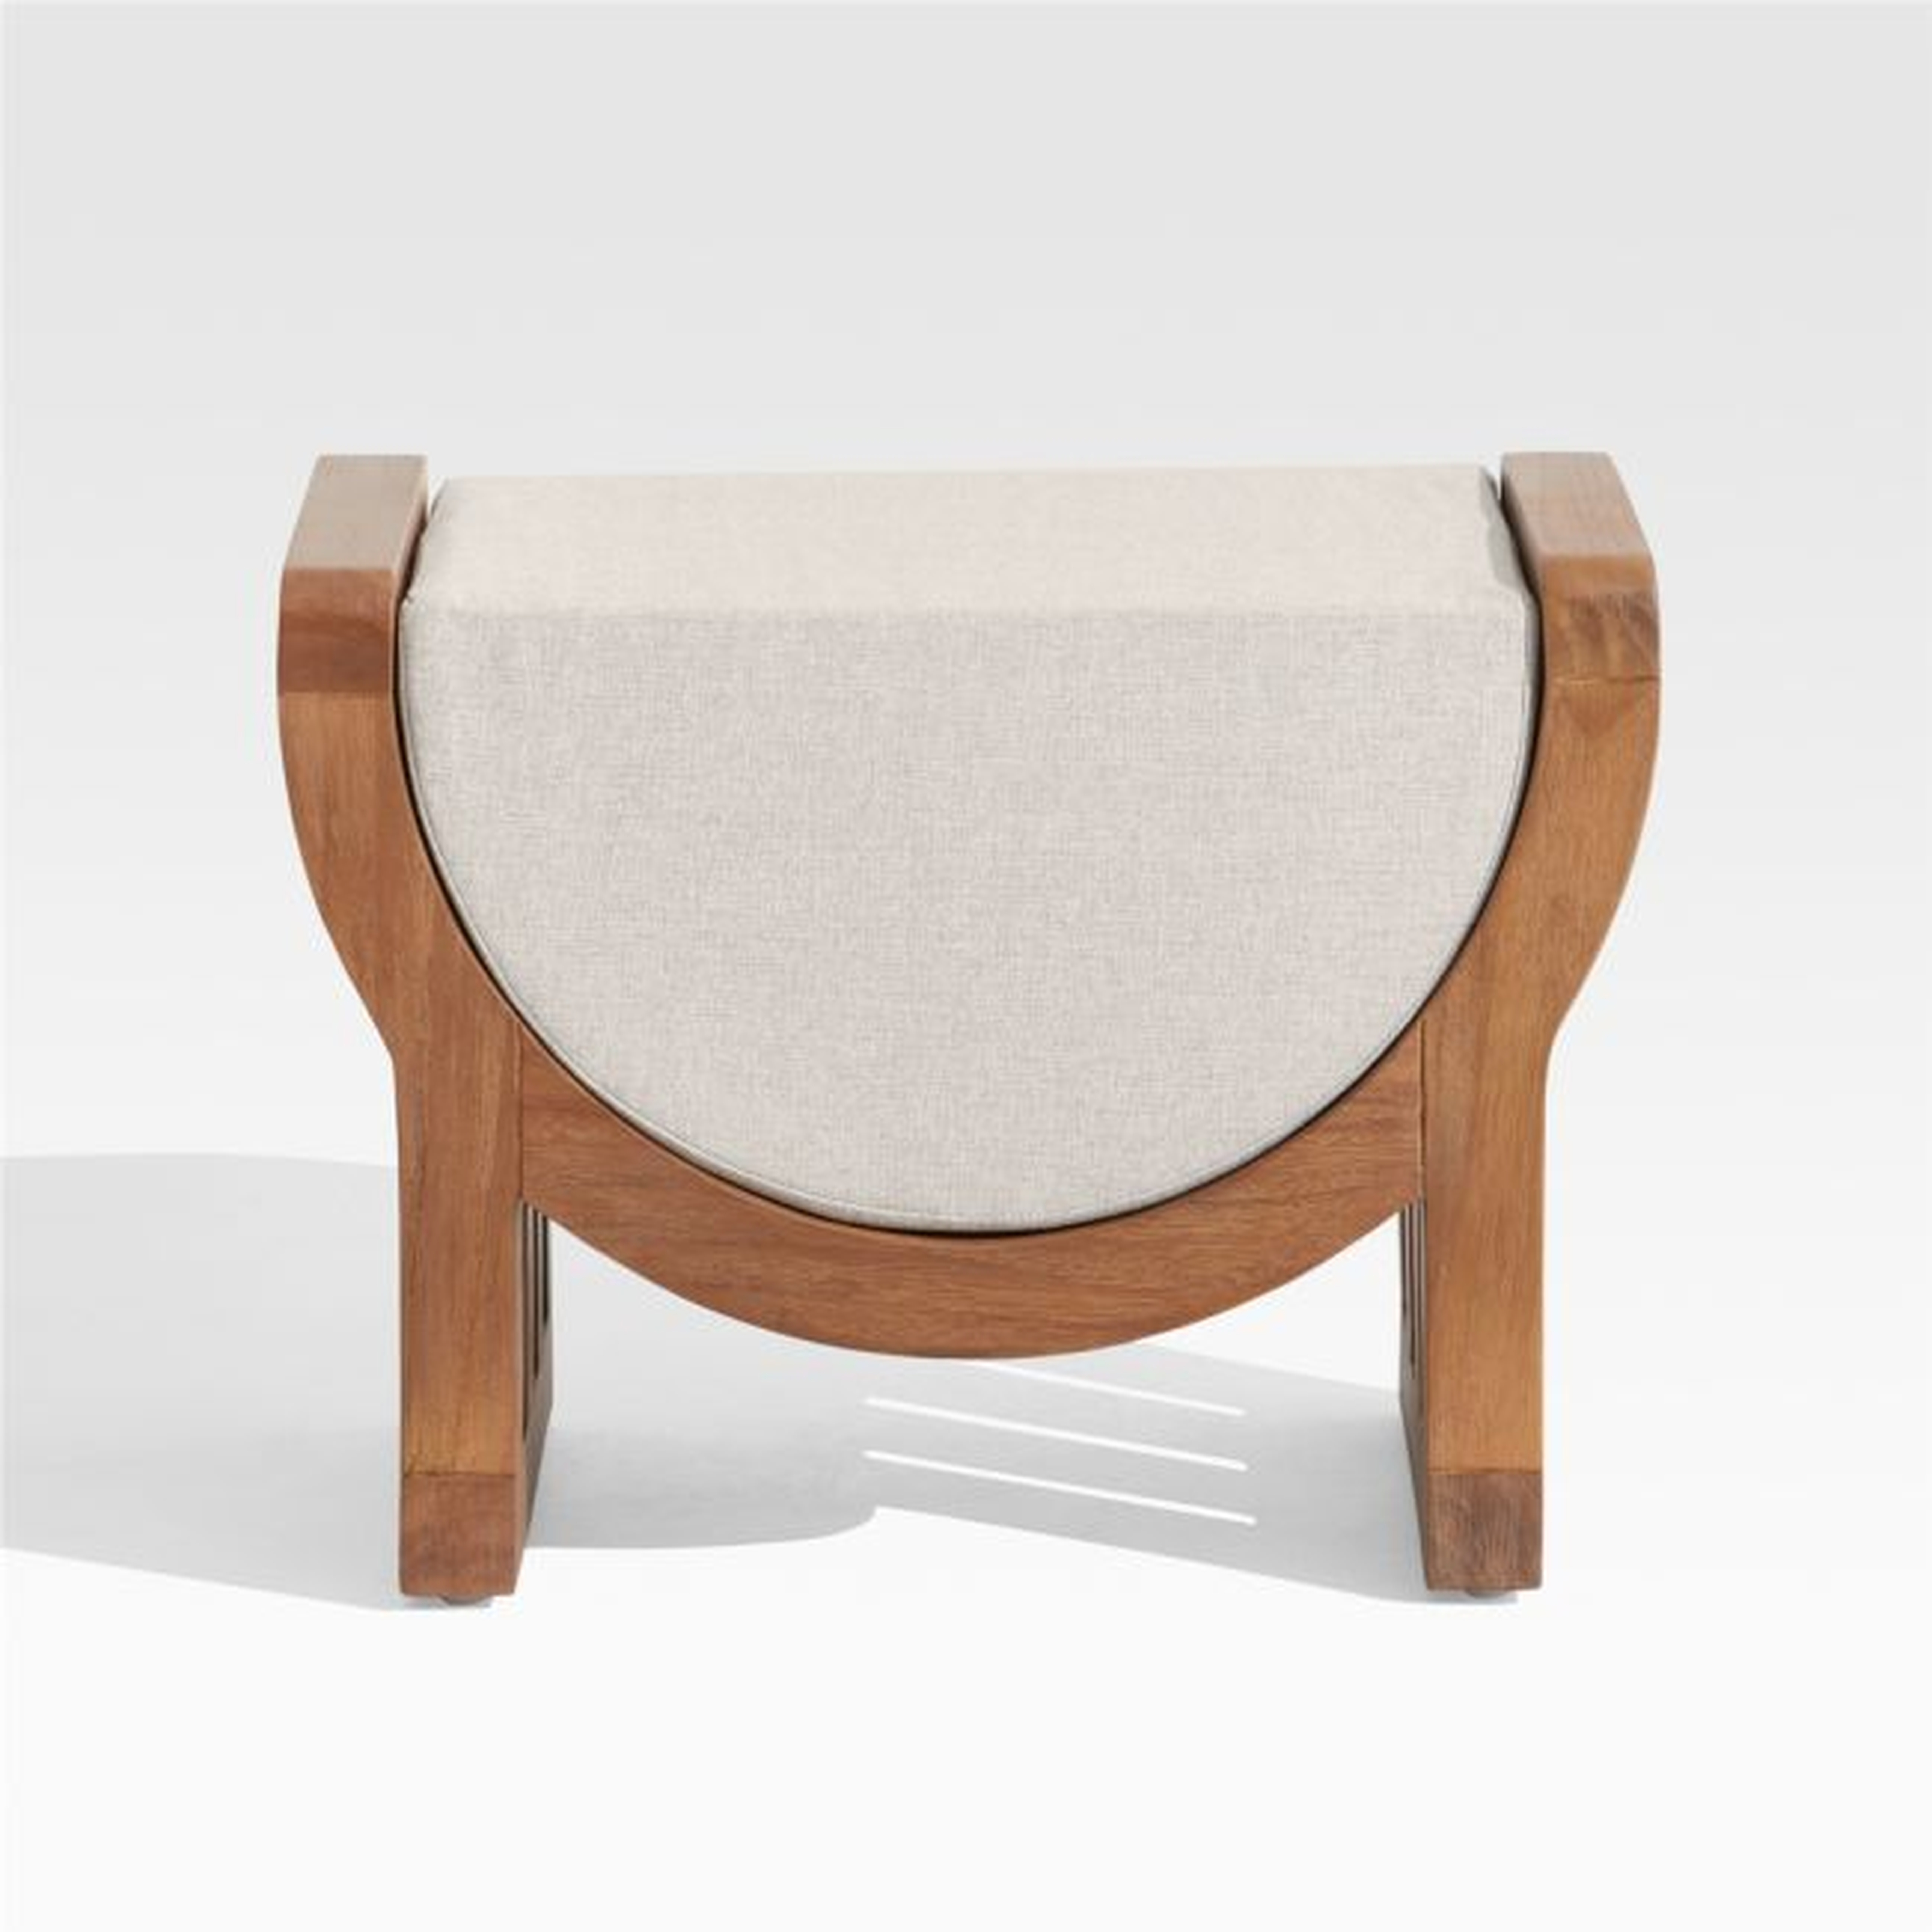 Chapala Outdoor Teak Ottoman with Cushion - Crate and Barrel